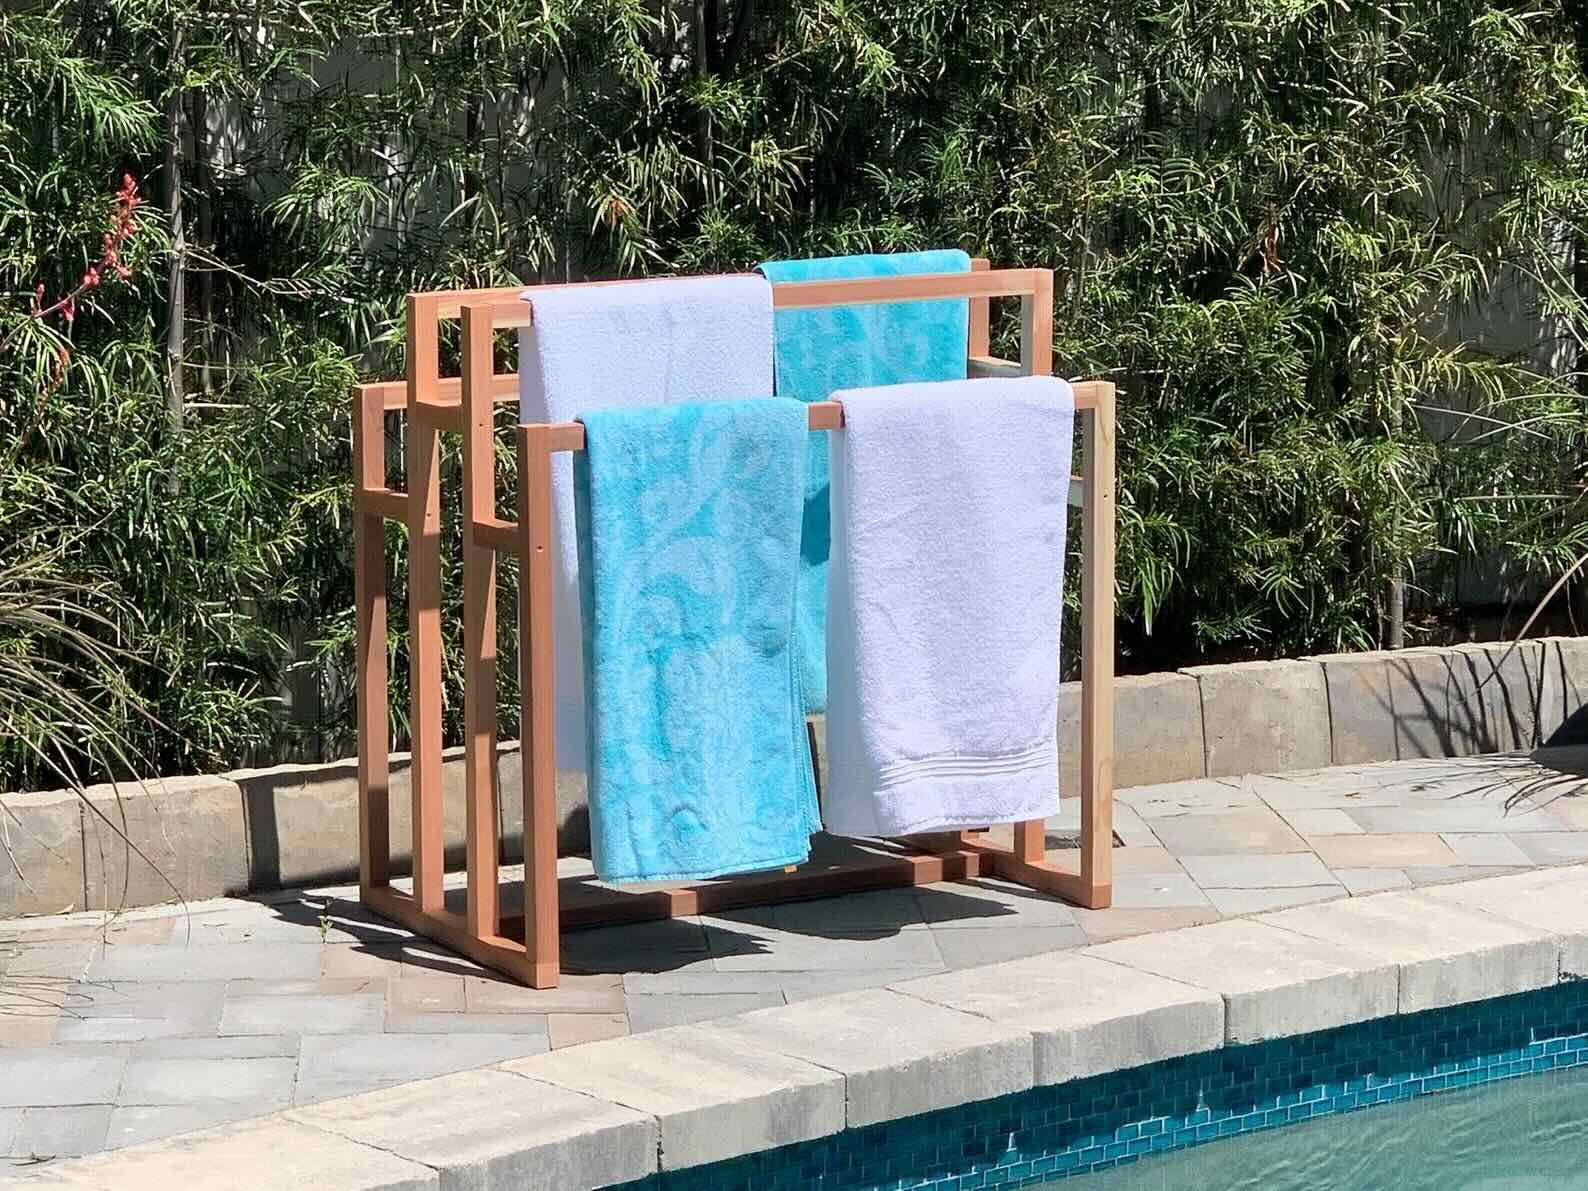 Coast Home & Patio Solutions - New item: towel rack and nice fluffy towels  for your hot tub or pool. Sprucing up for spring.